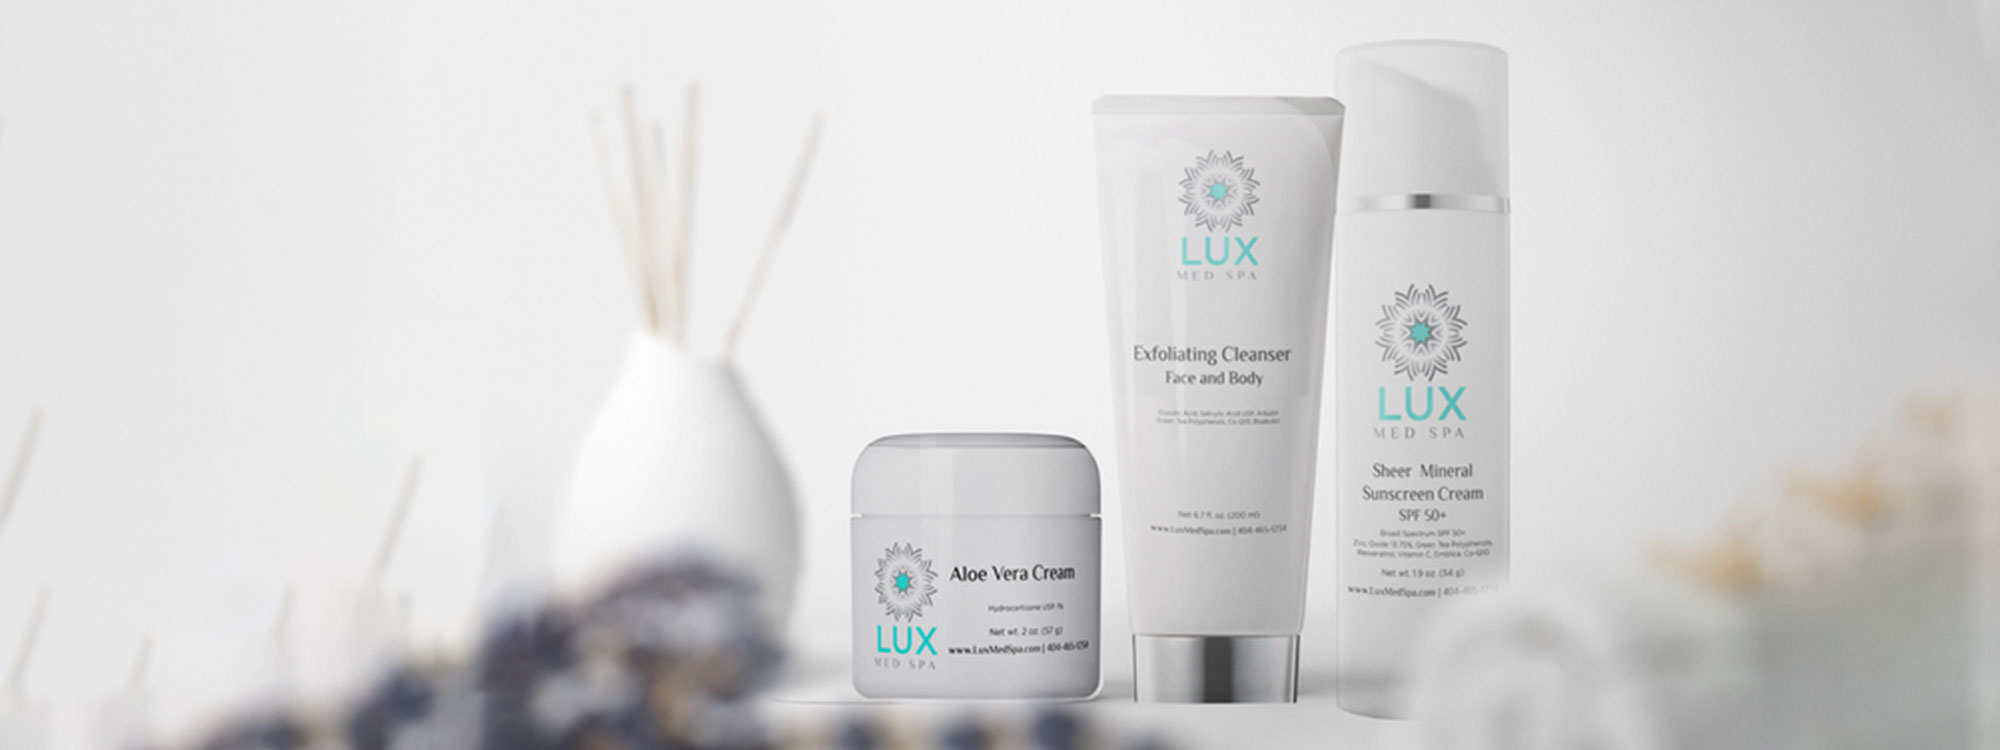 Introducing LUXurious Skincare Exclusively by LUX Med Spa